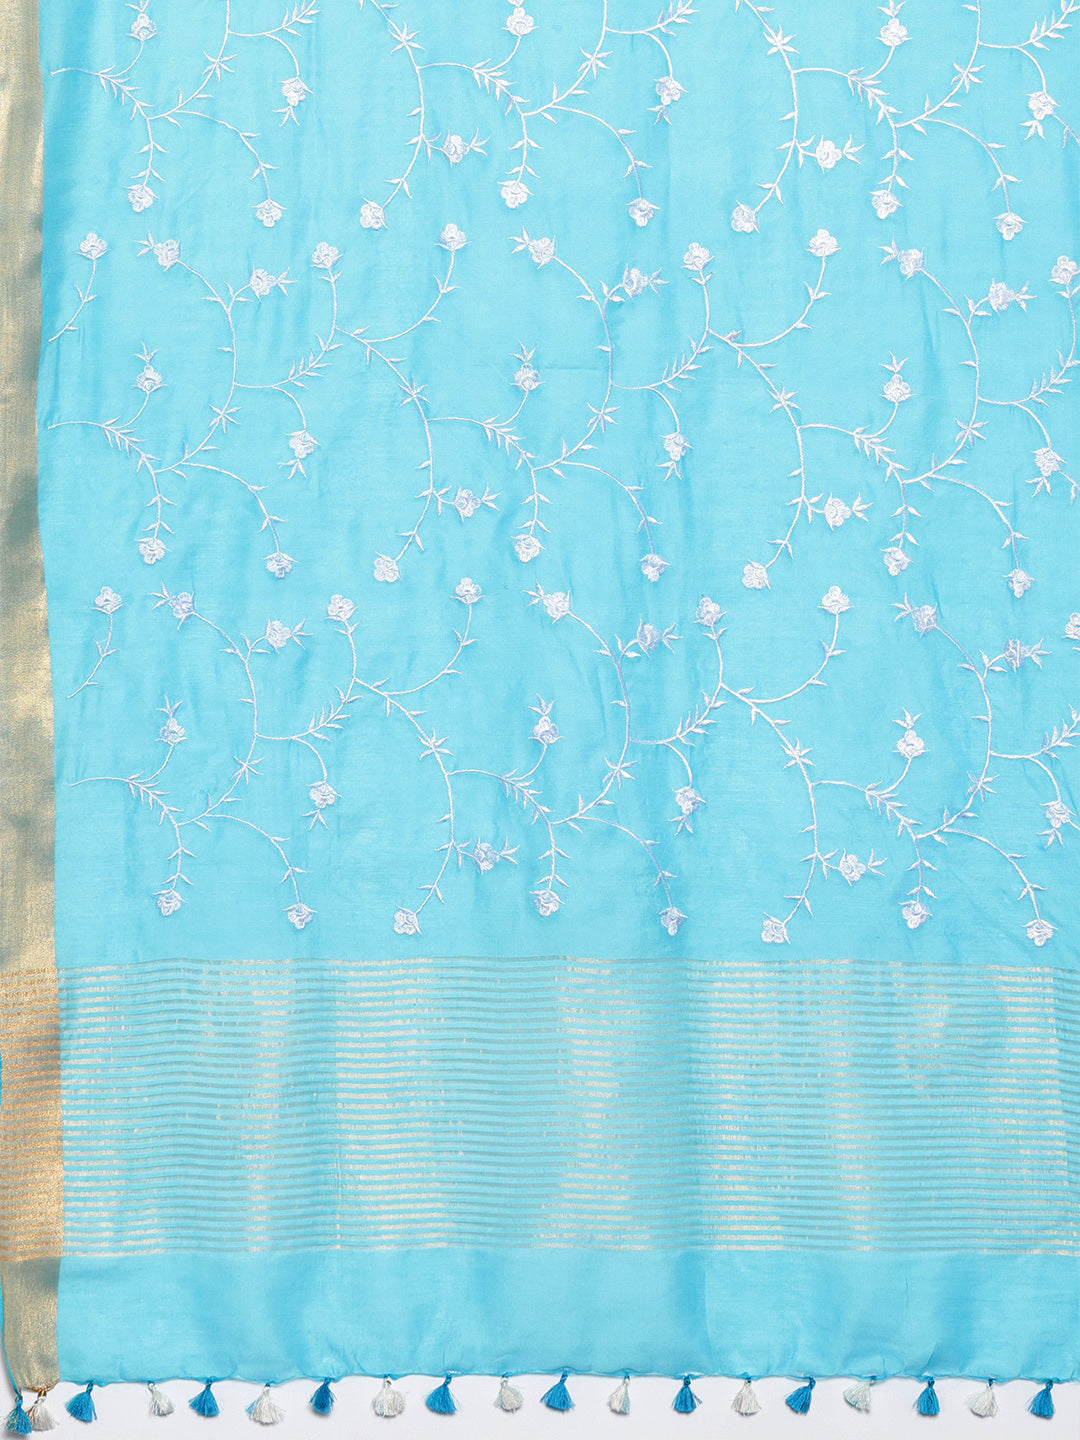 Kalakari India Kota Silk Embroidered Saree With Blouse ALBGSA0160-Saree-Kalakari India-ALBGSA0160-Geographical Indication, Hand Crafted, Heritage Prints, Linen, Natural Dyes, Pure Cotton, Sarees, Sustainable Fabrics, Woven-[Linen,Ethnic,wear,Fashionista,Handloom,Handicraft,Indigo,blockprint,block,print,Cotton,Chanderi,Blue, latest,classy,party,bollywood,trendy,summer,style,traditional,formal,elegant,unique,style,hand,block,print, dabu,booti,gift,present,glamorous,affordable,collectible,Sari,Sare